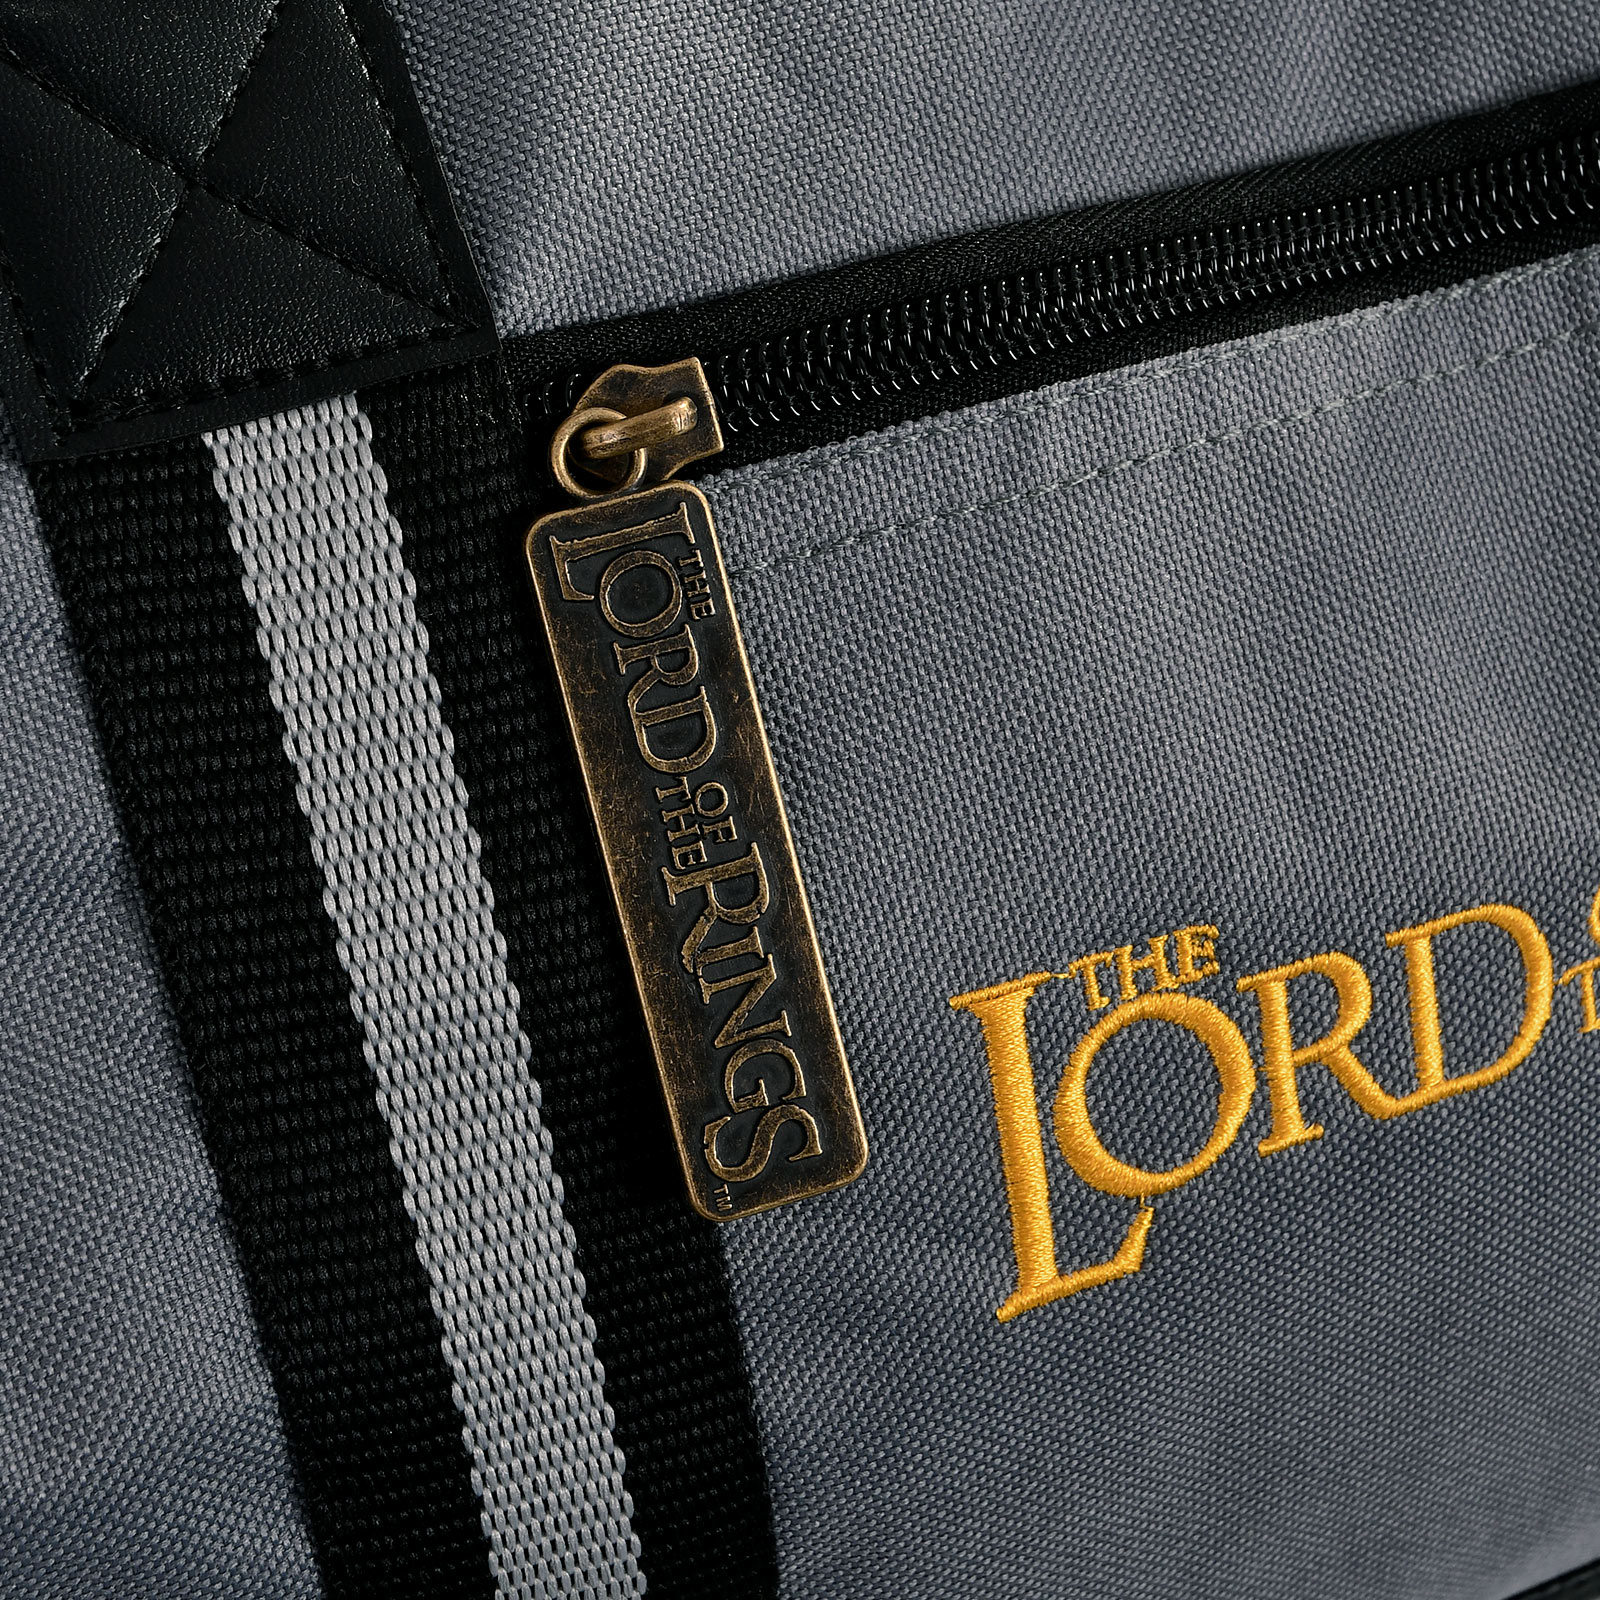 Lord of the Rings - The One Sports Bag Black